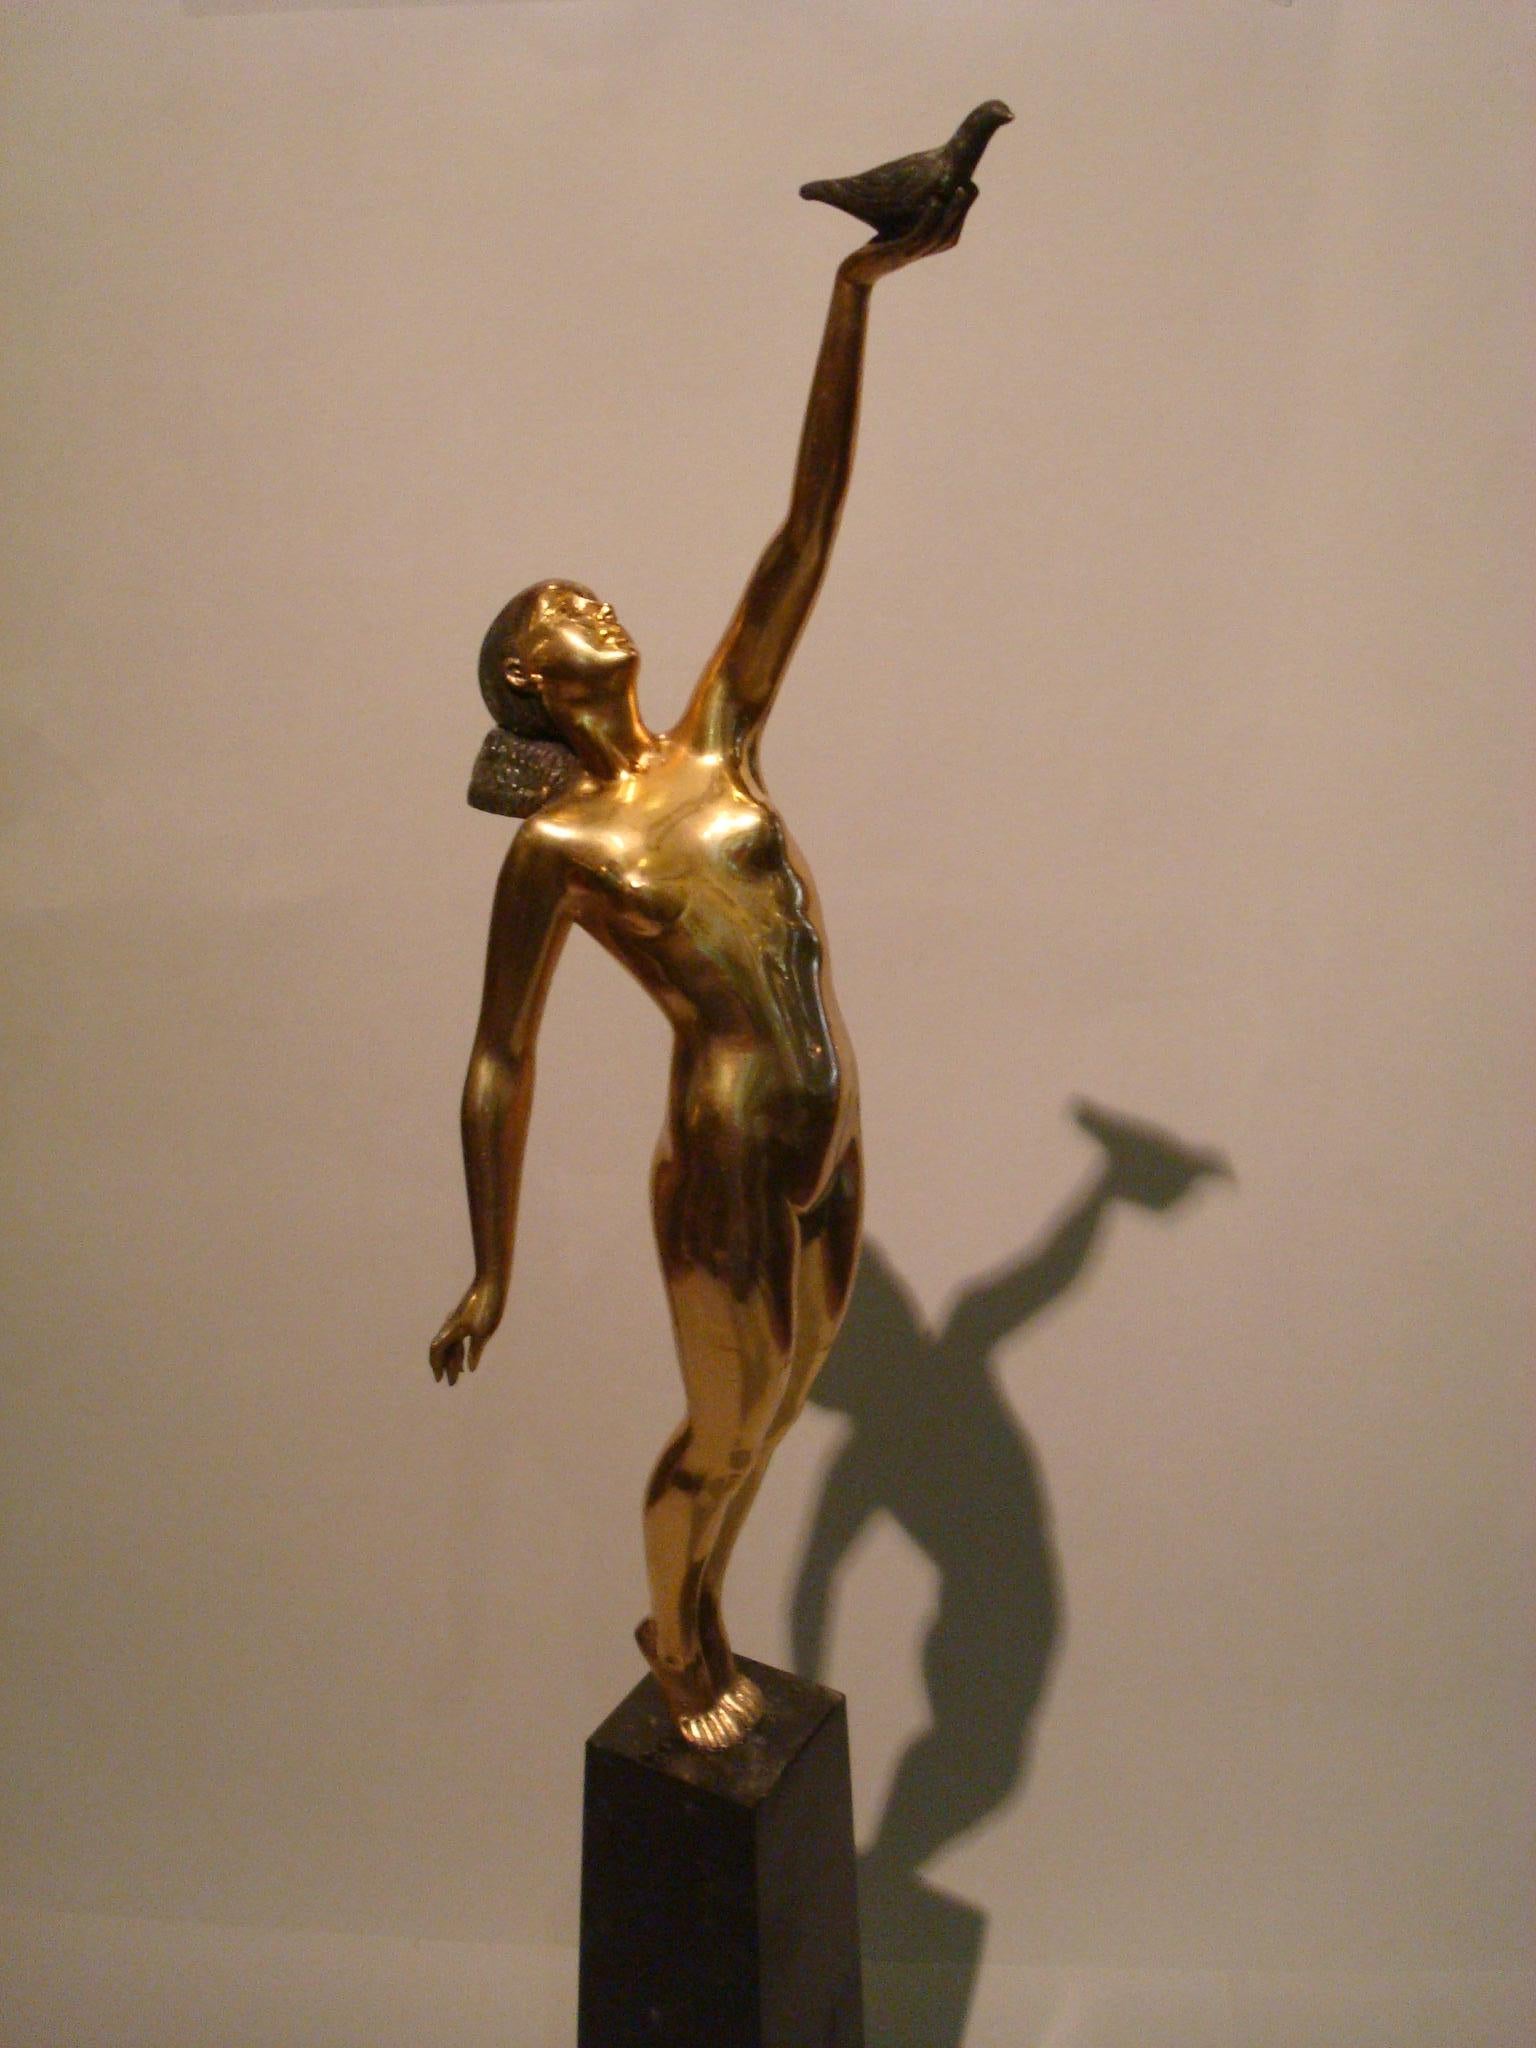 Art Deco bronze sculpture of a nude figure holding a dove by Pierre le Faguays Art Deco patinated bronze sculpture on a marble base depicting a nude figure holding a dove by Pierre le Faguays entitled message of love.
Made in France, circa